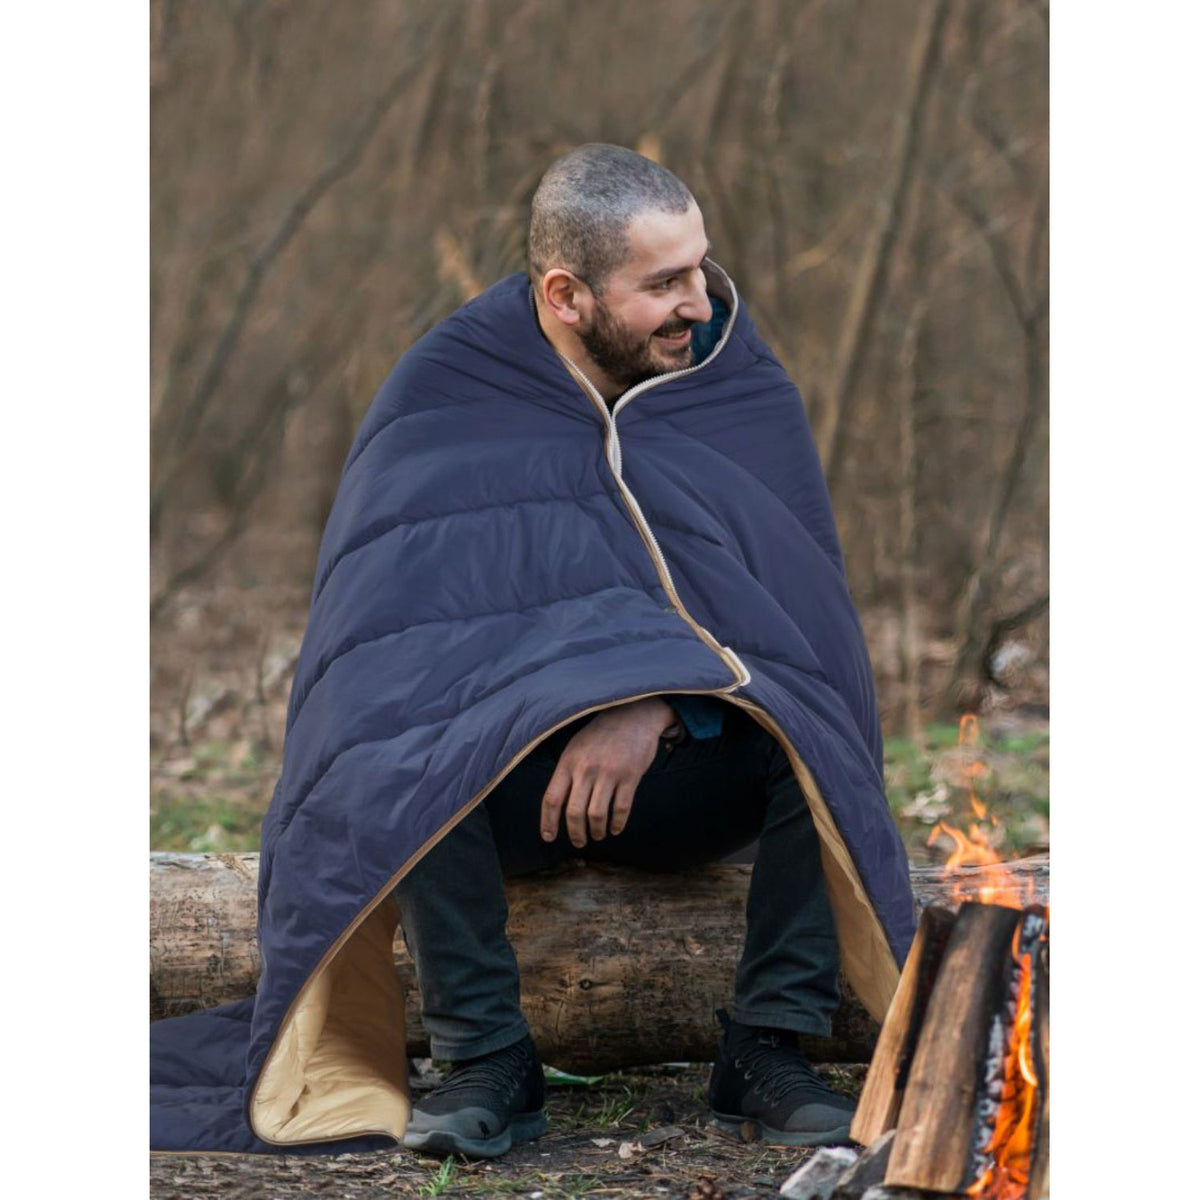 Great Outdoors 3 in 1 Poncho